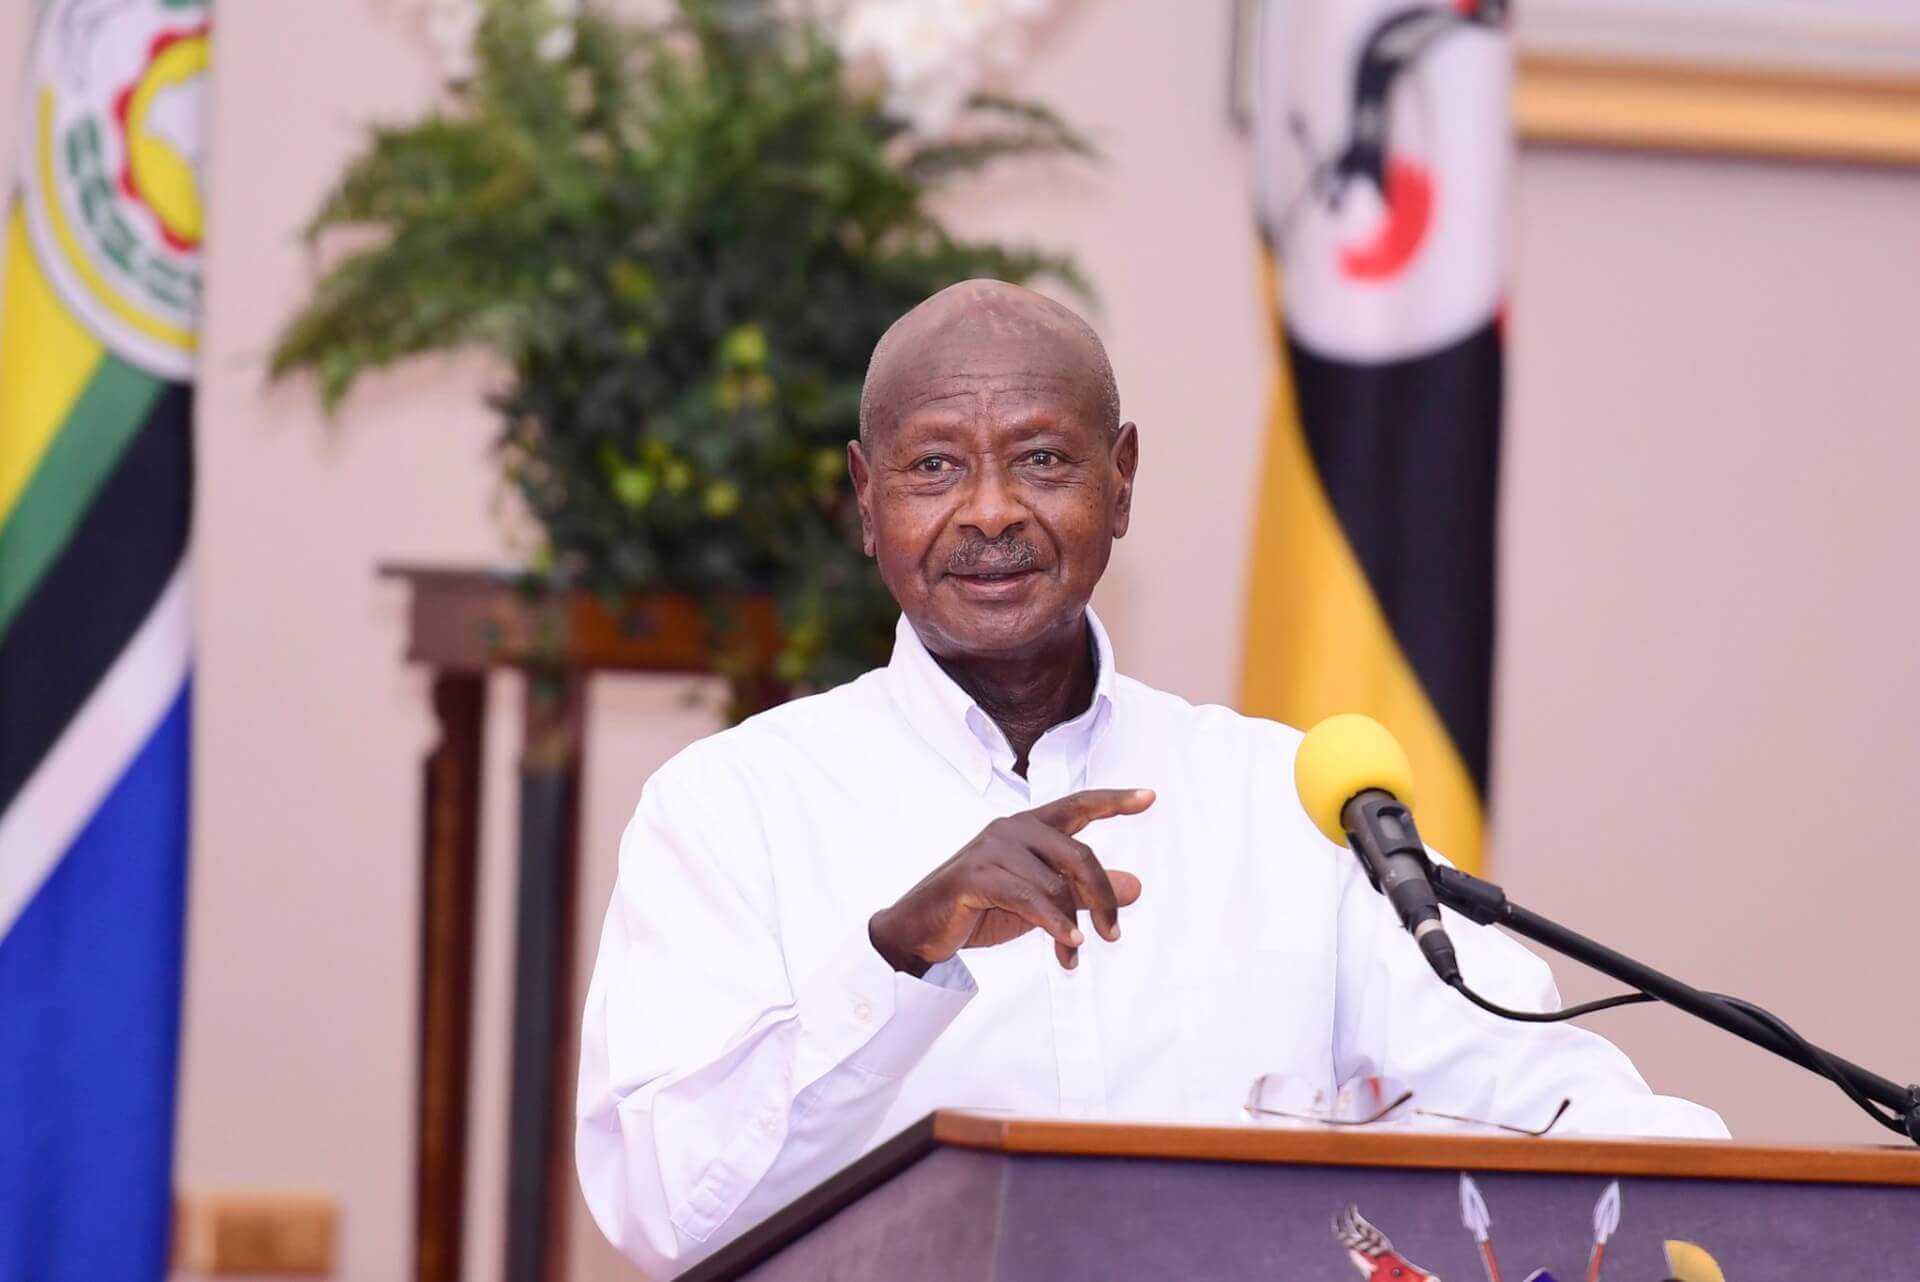 Ugandan President Museveni Continues to Create Insurmountable Obstacles For Opposition